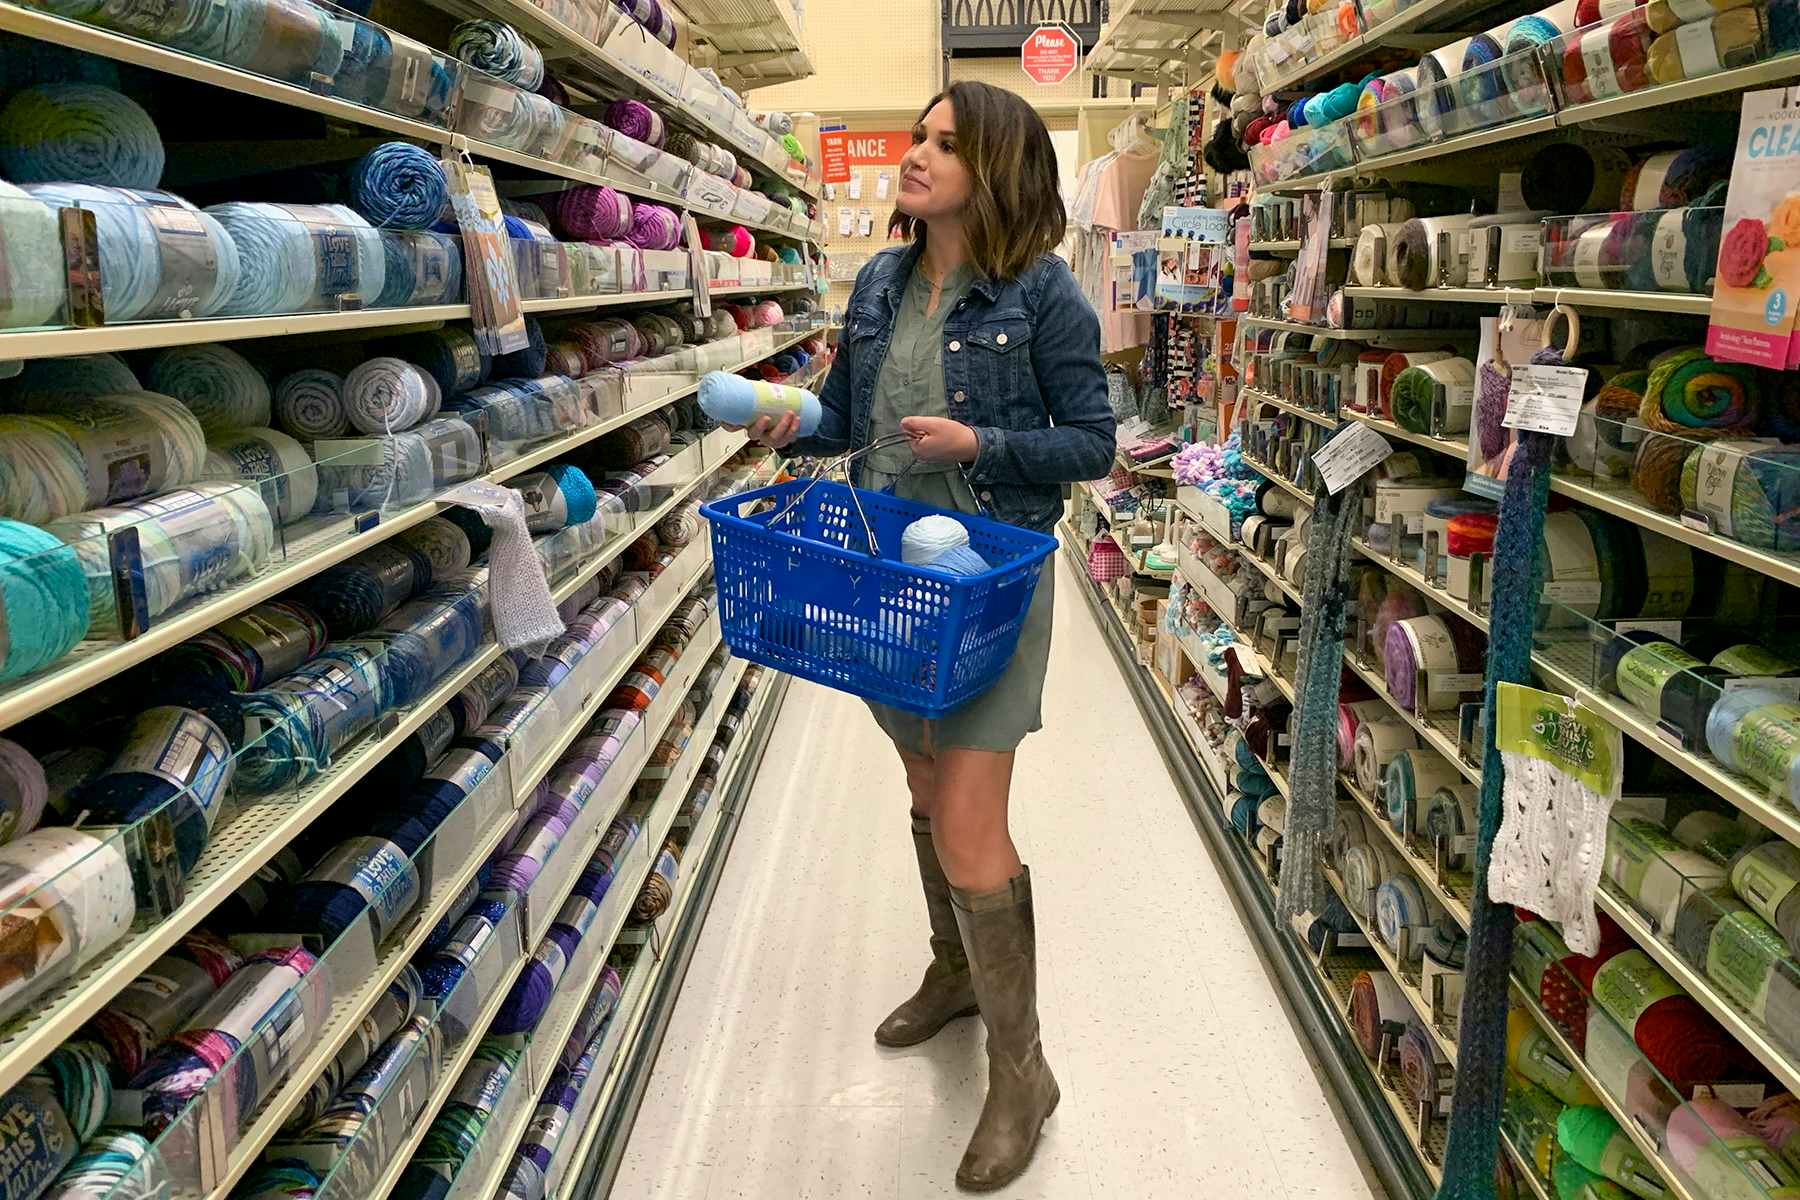 A woman filling a hand basket with yarn at Hobby Lobby.